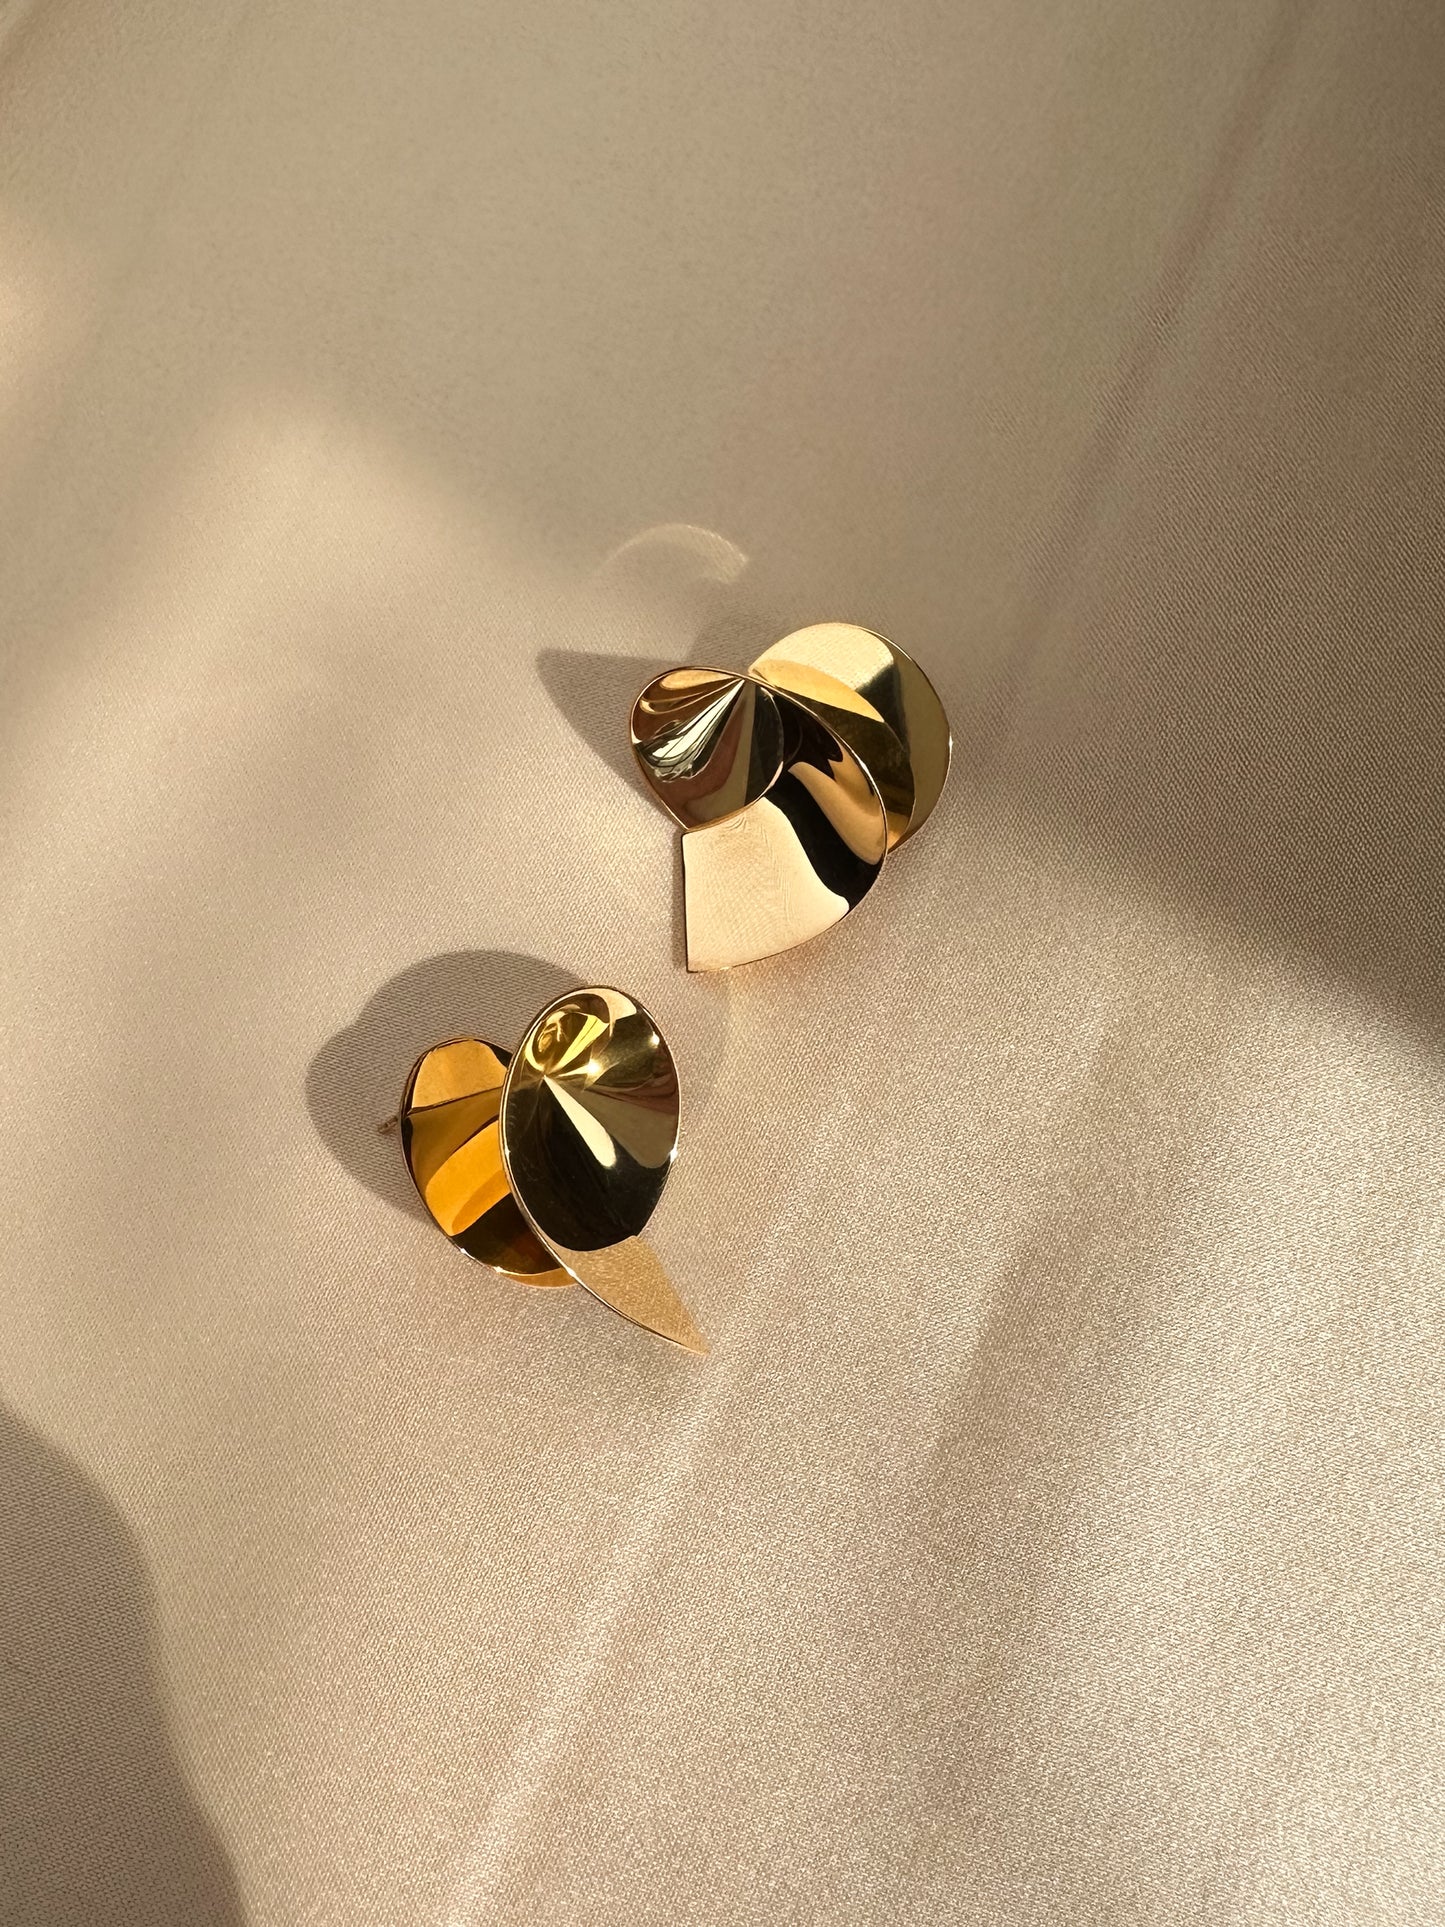 Coil earrings in gold vermeil by Sara Robertsson Jewellery